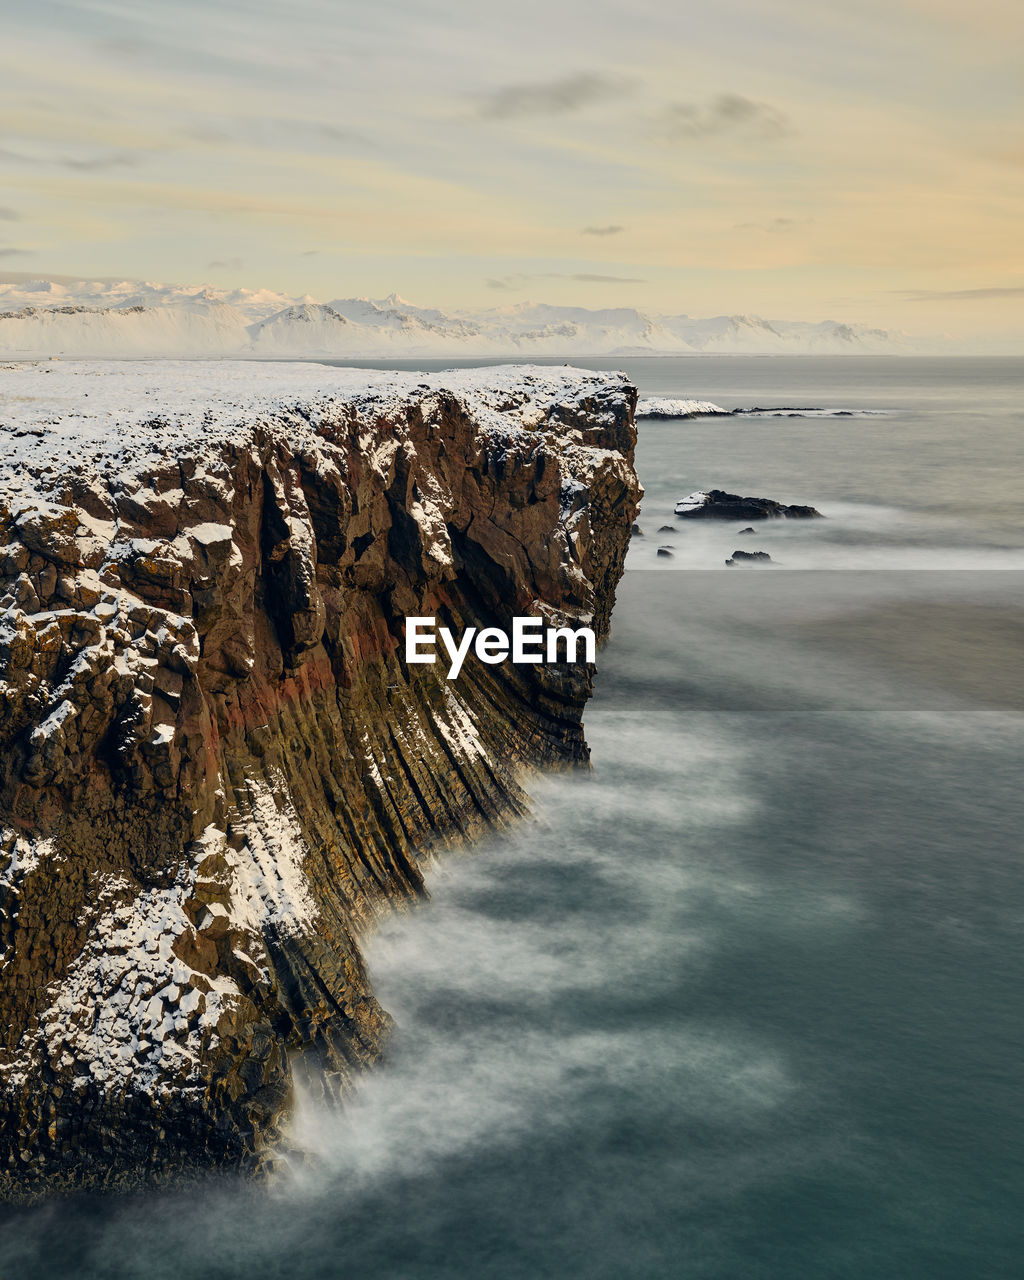 Amazing landscape of cliff and sea in winter